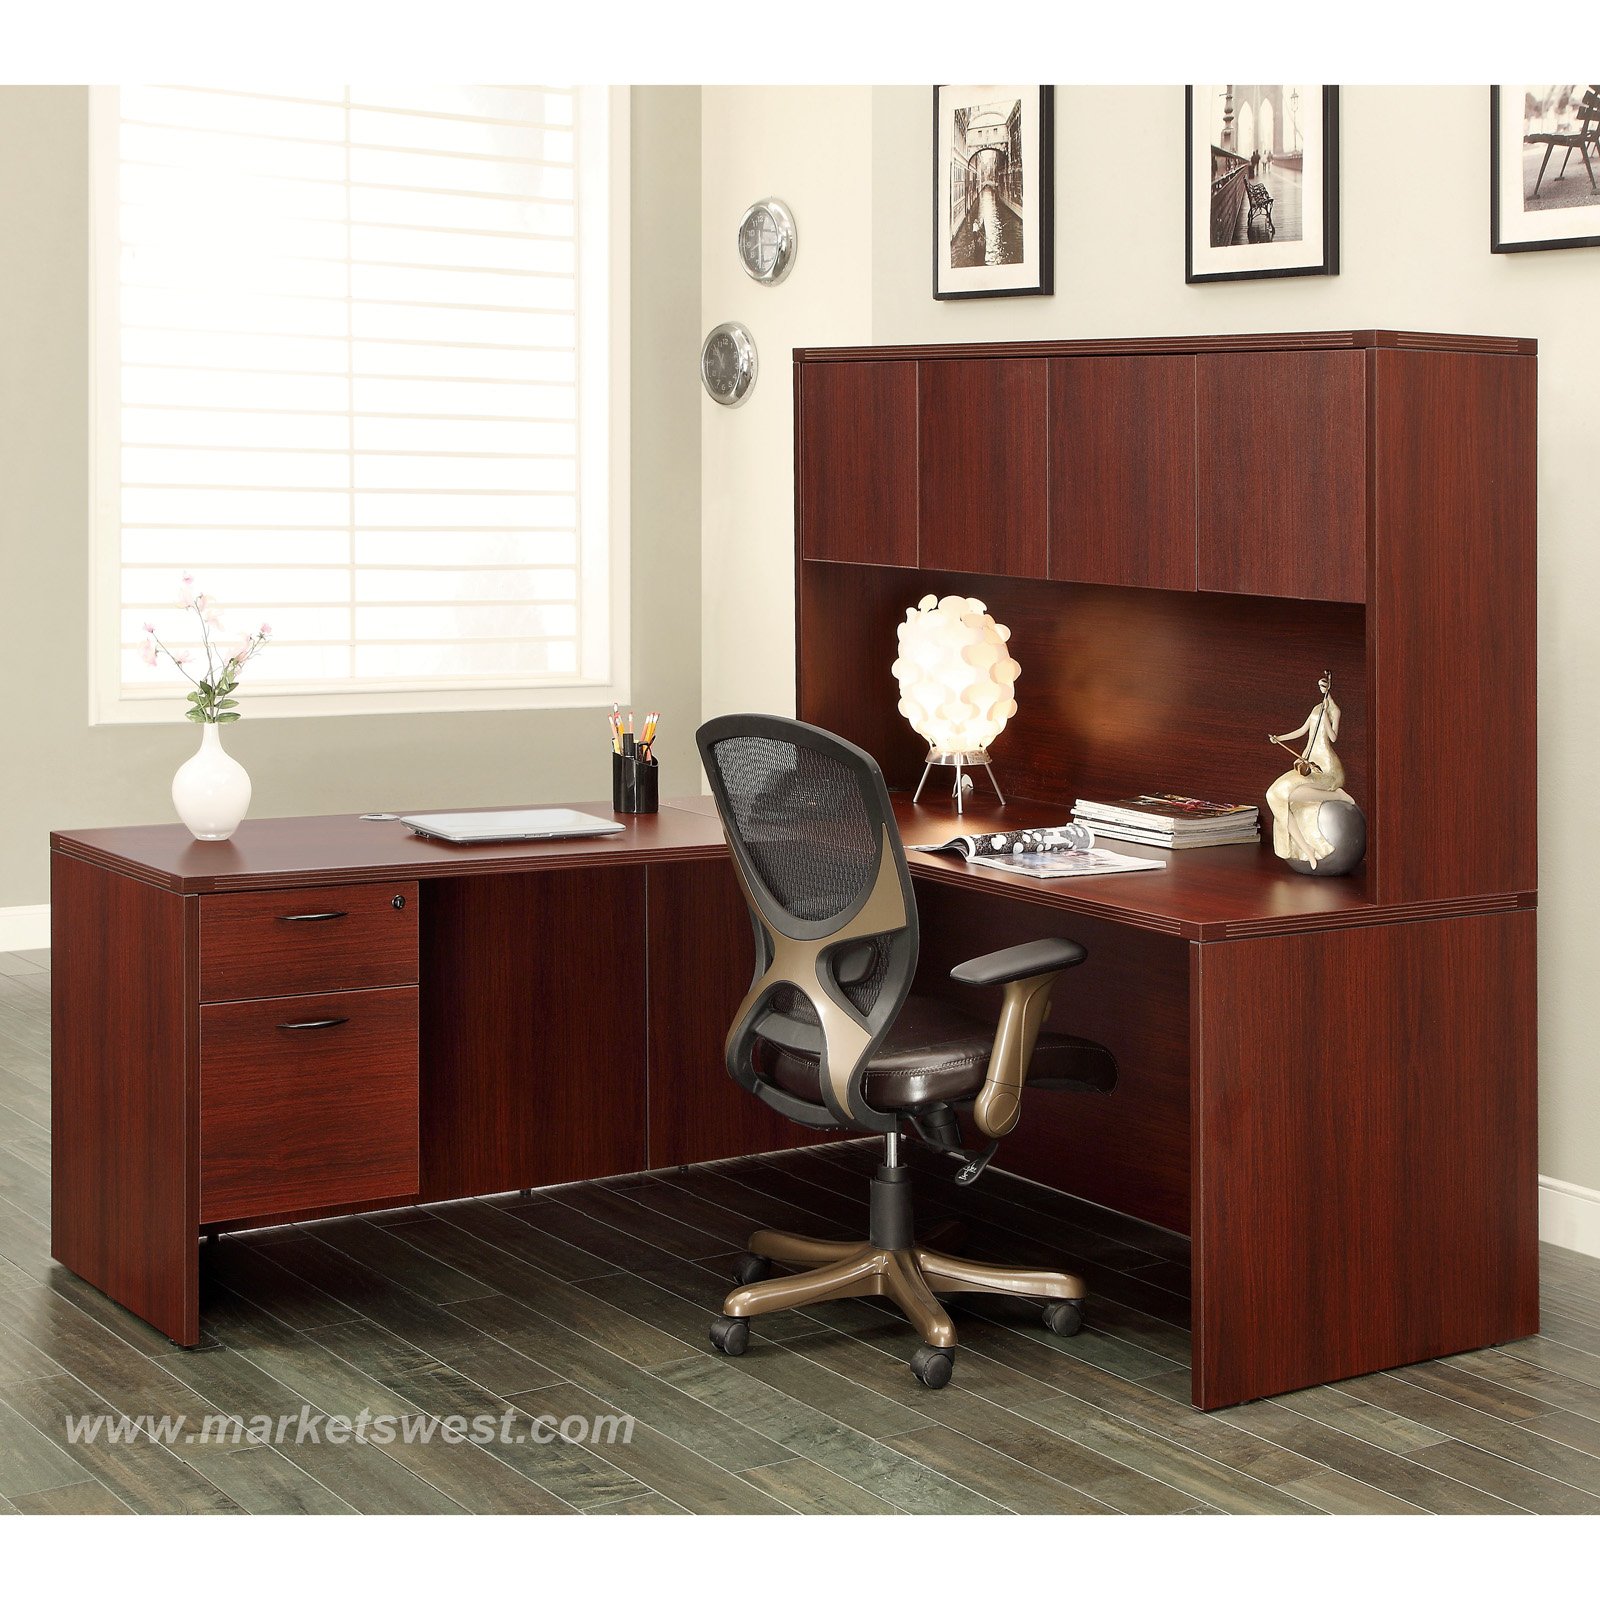 L Shape Desk With Hutch 66x78 Cherry Or Mahogany